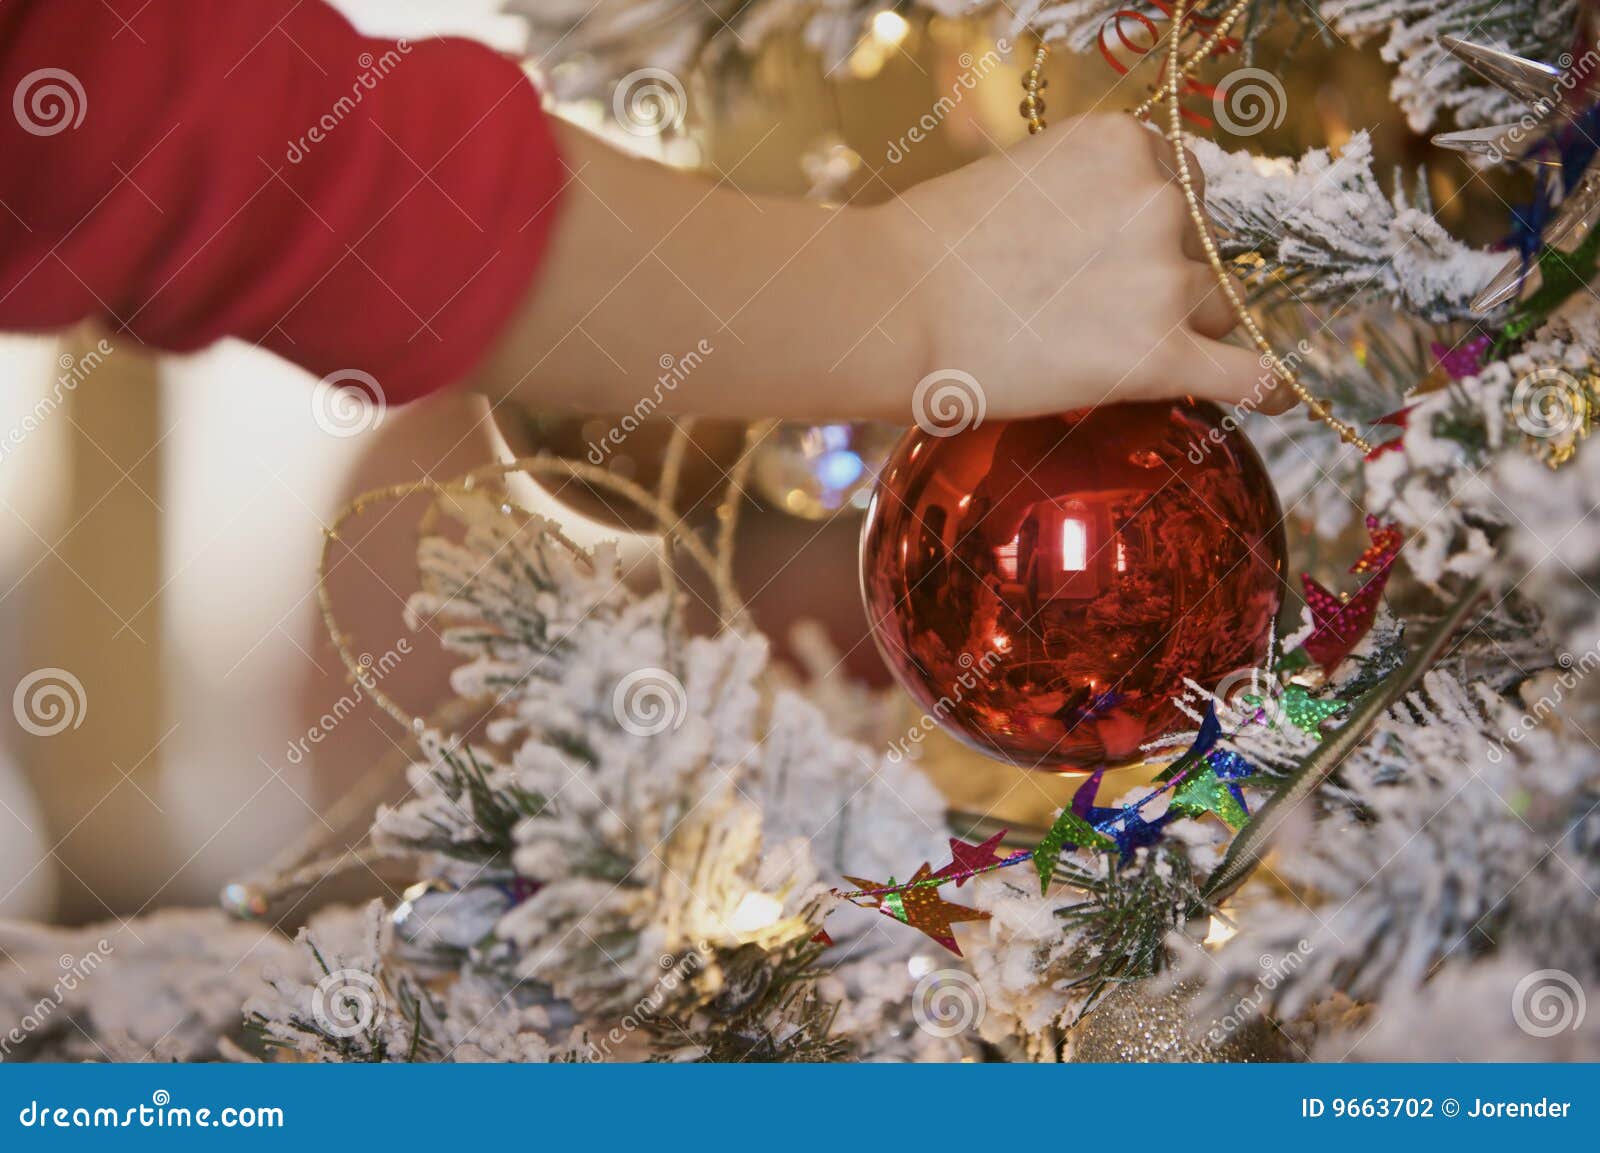 Child Hanging Ornament stock photo. Image of home, close - 9663702